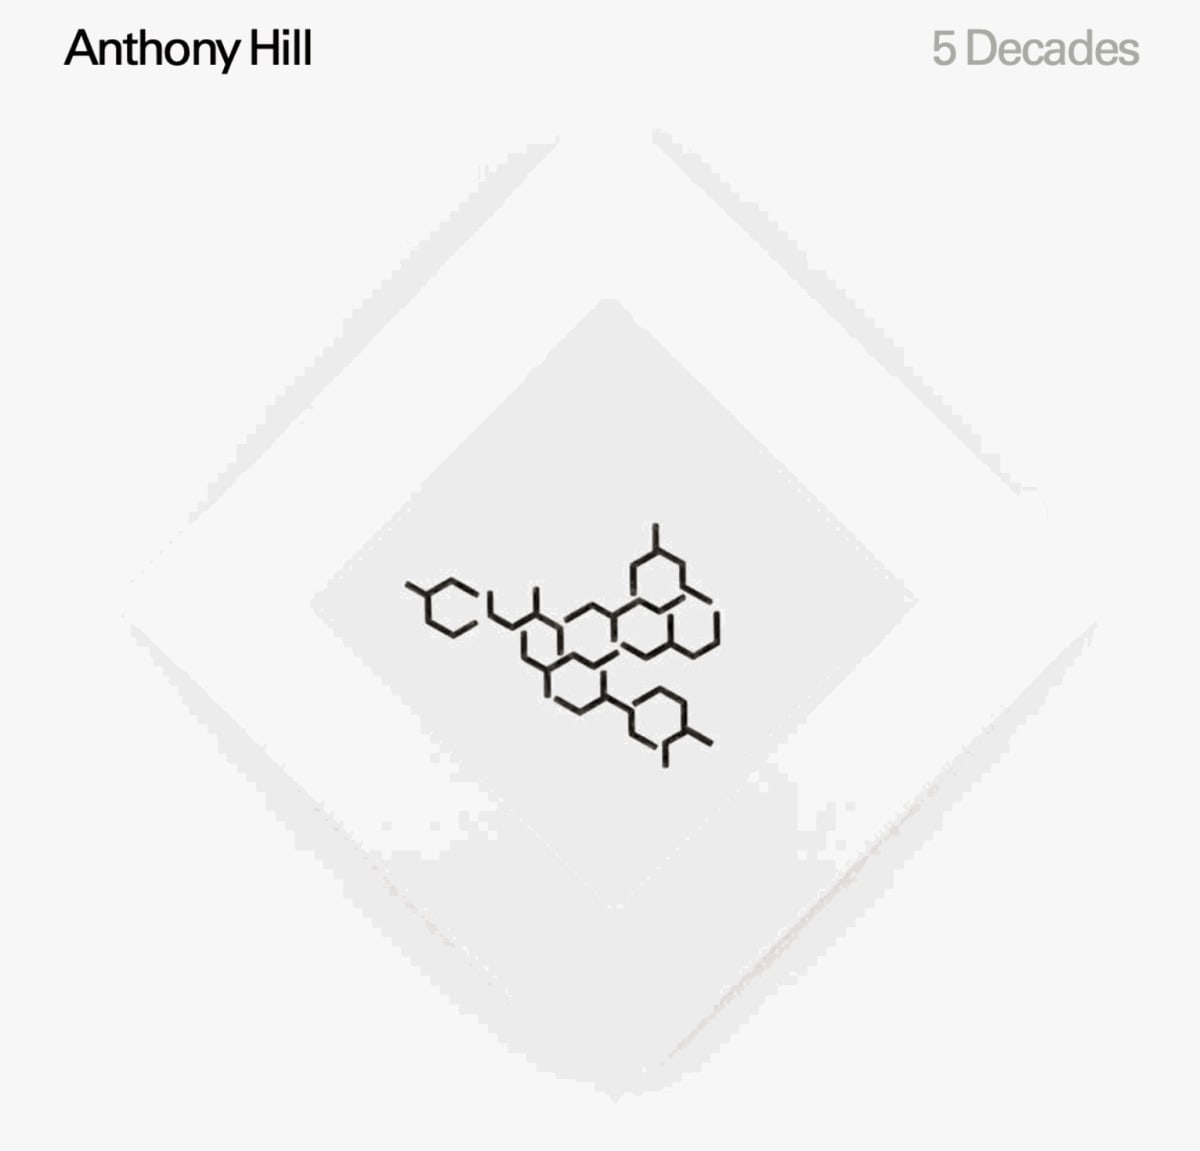 Anthony Hill, 5 Decades